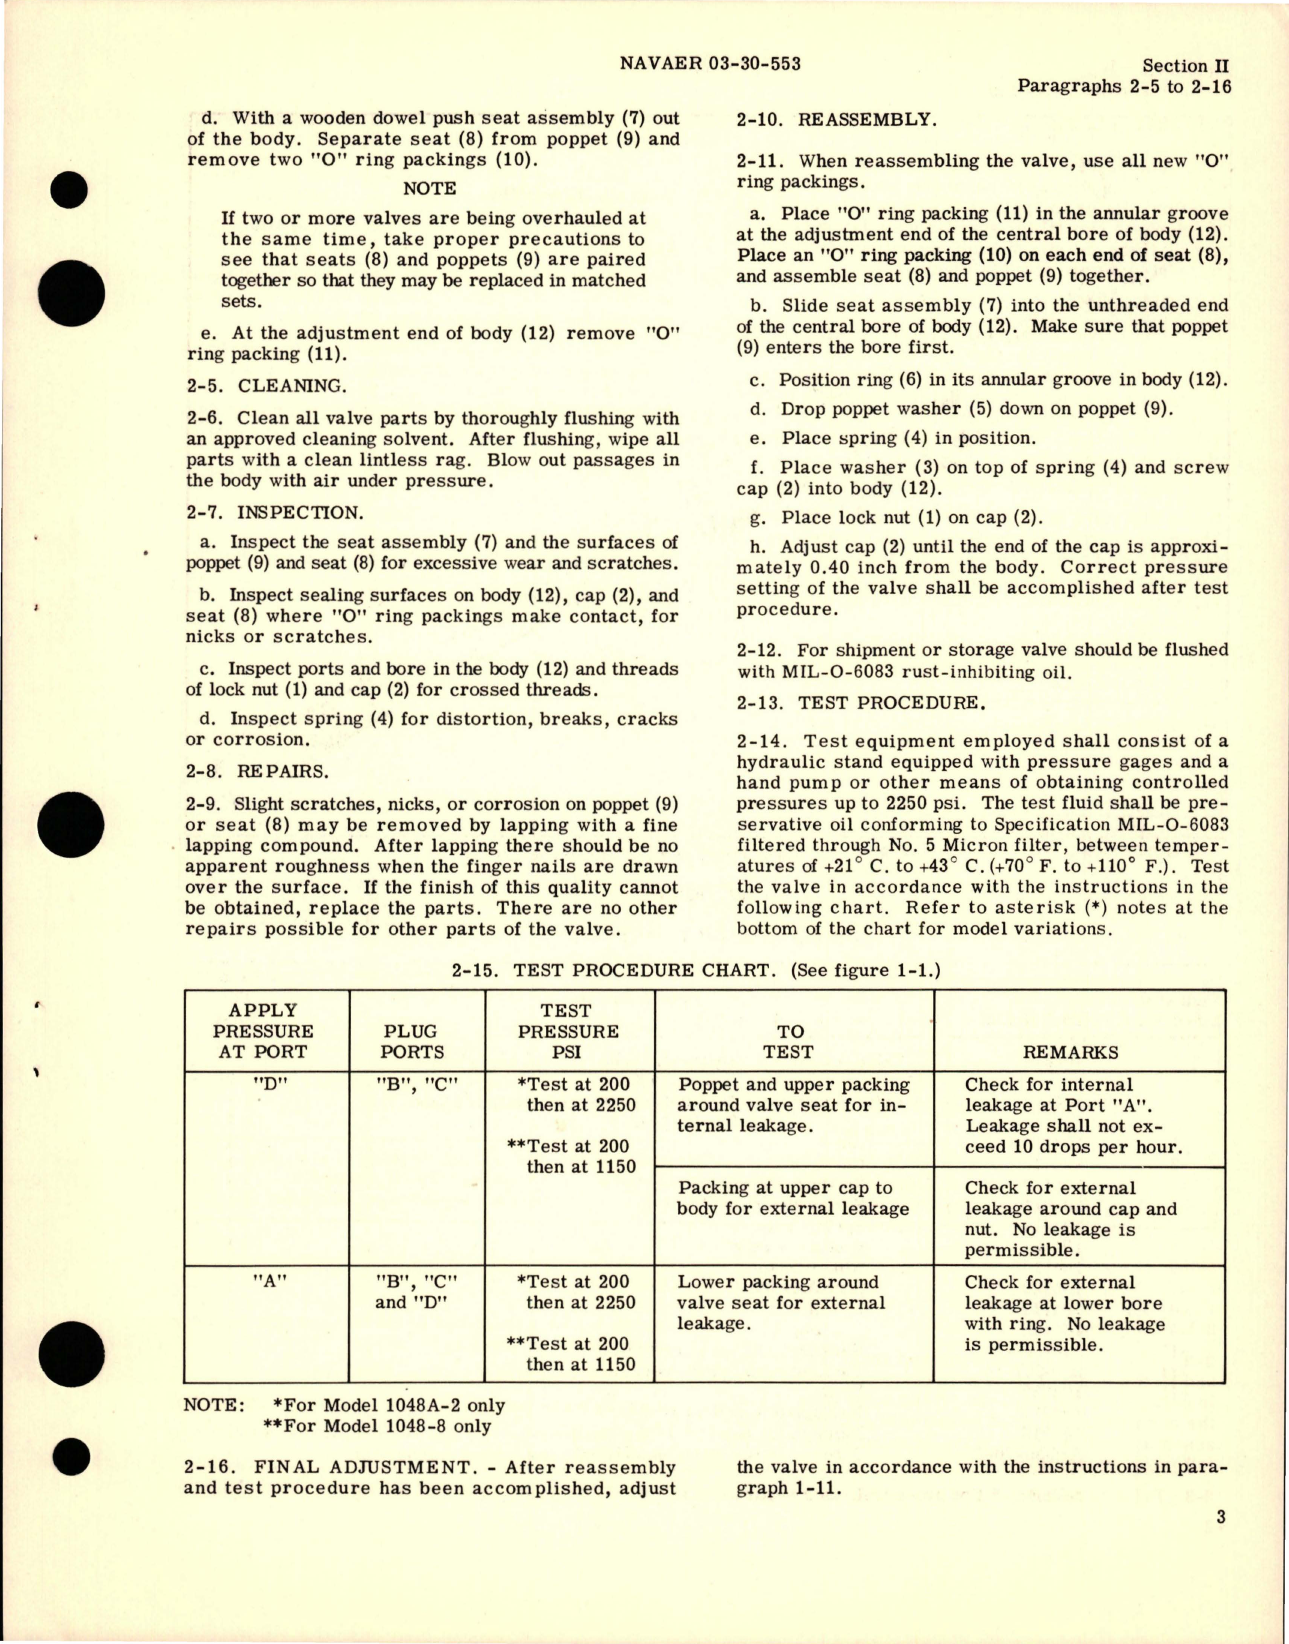 Sample page 5 from AirCorps Library document: Operation, Service and Overhaul Instructions with Parts Catalog for Hydraulic Relief Valve - Models 1048A-2 and 1048-8